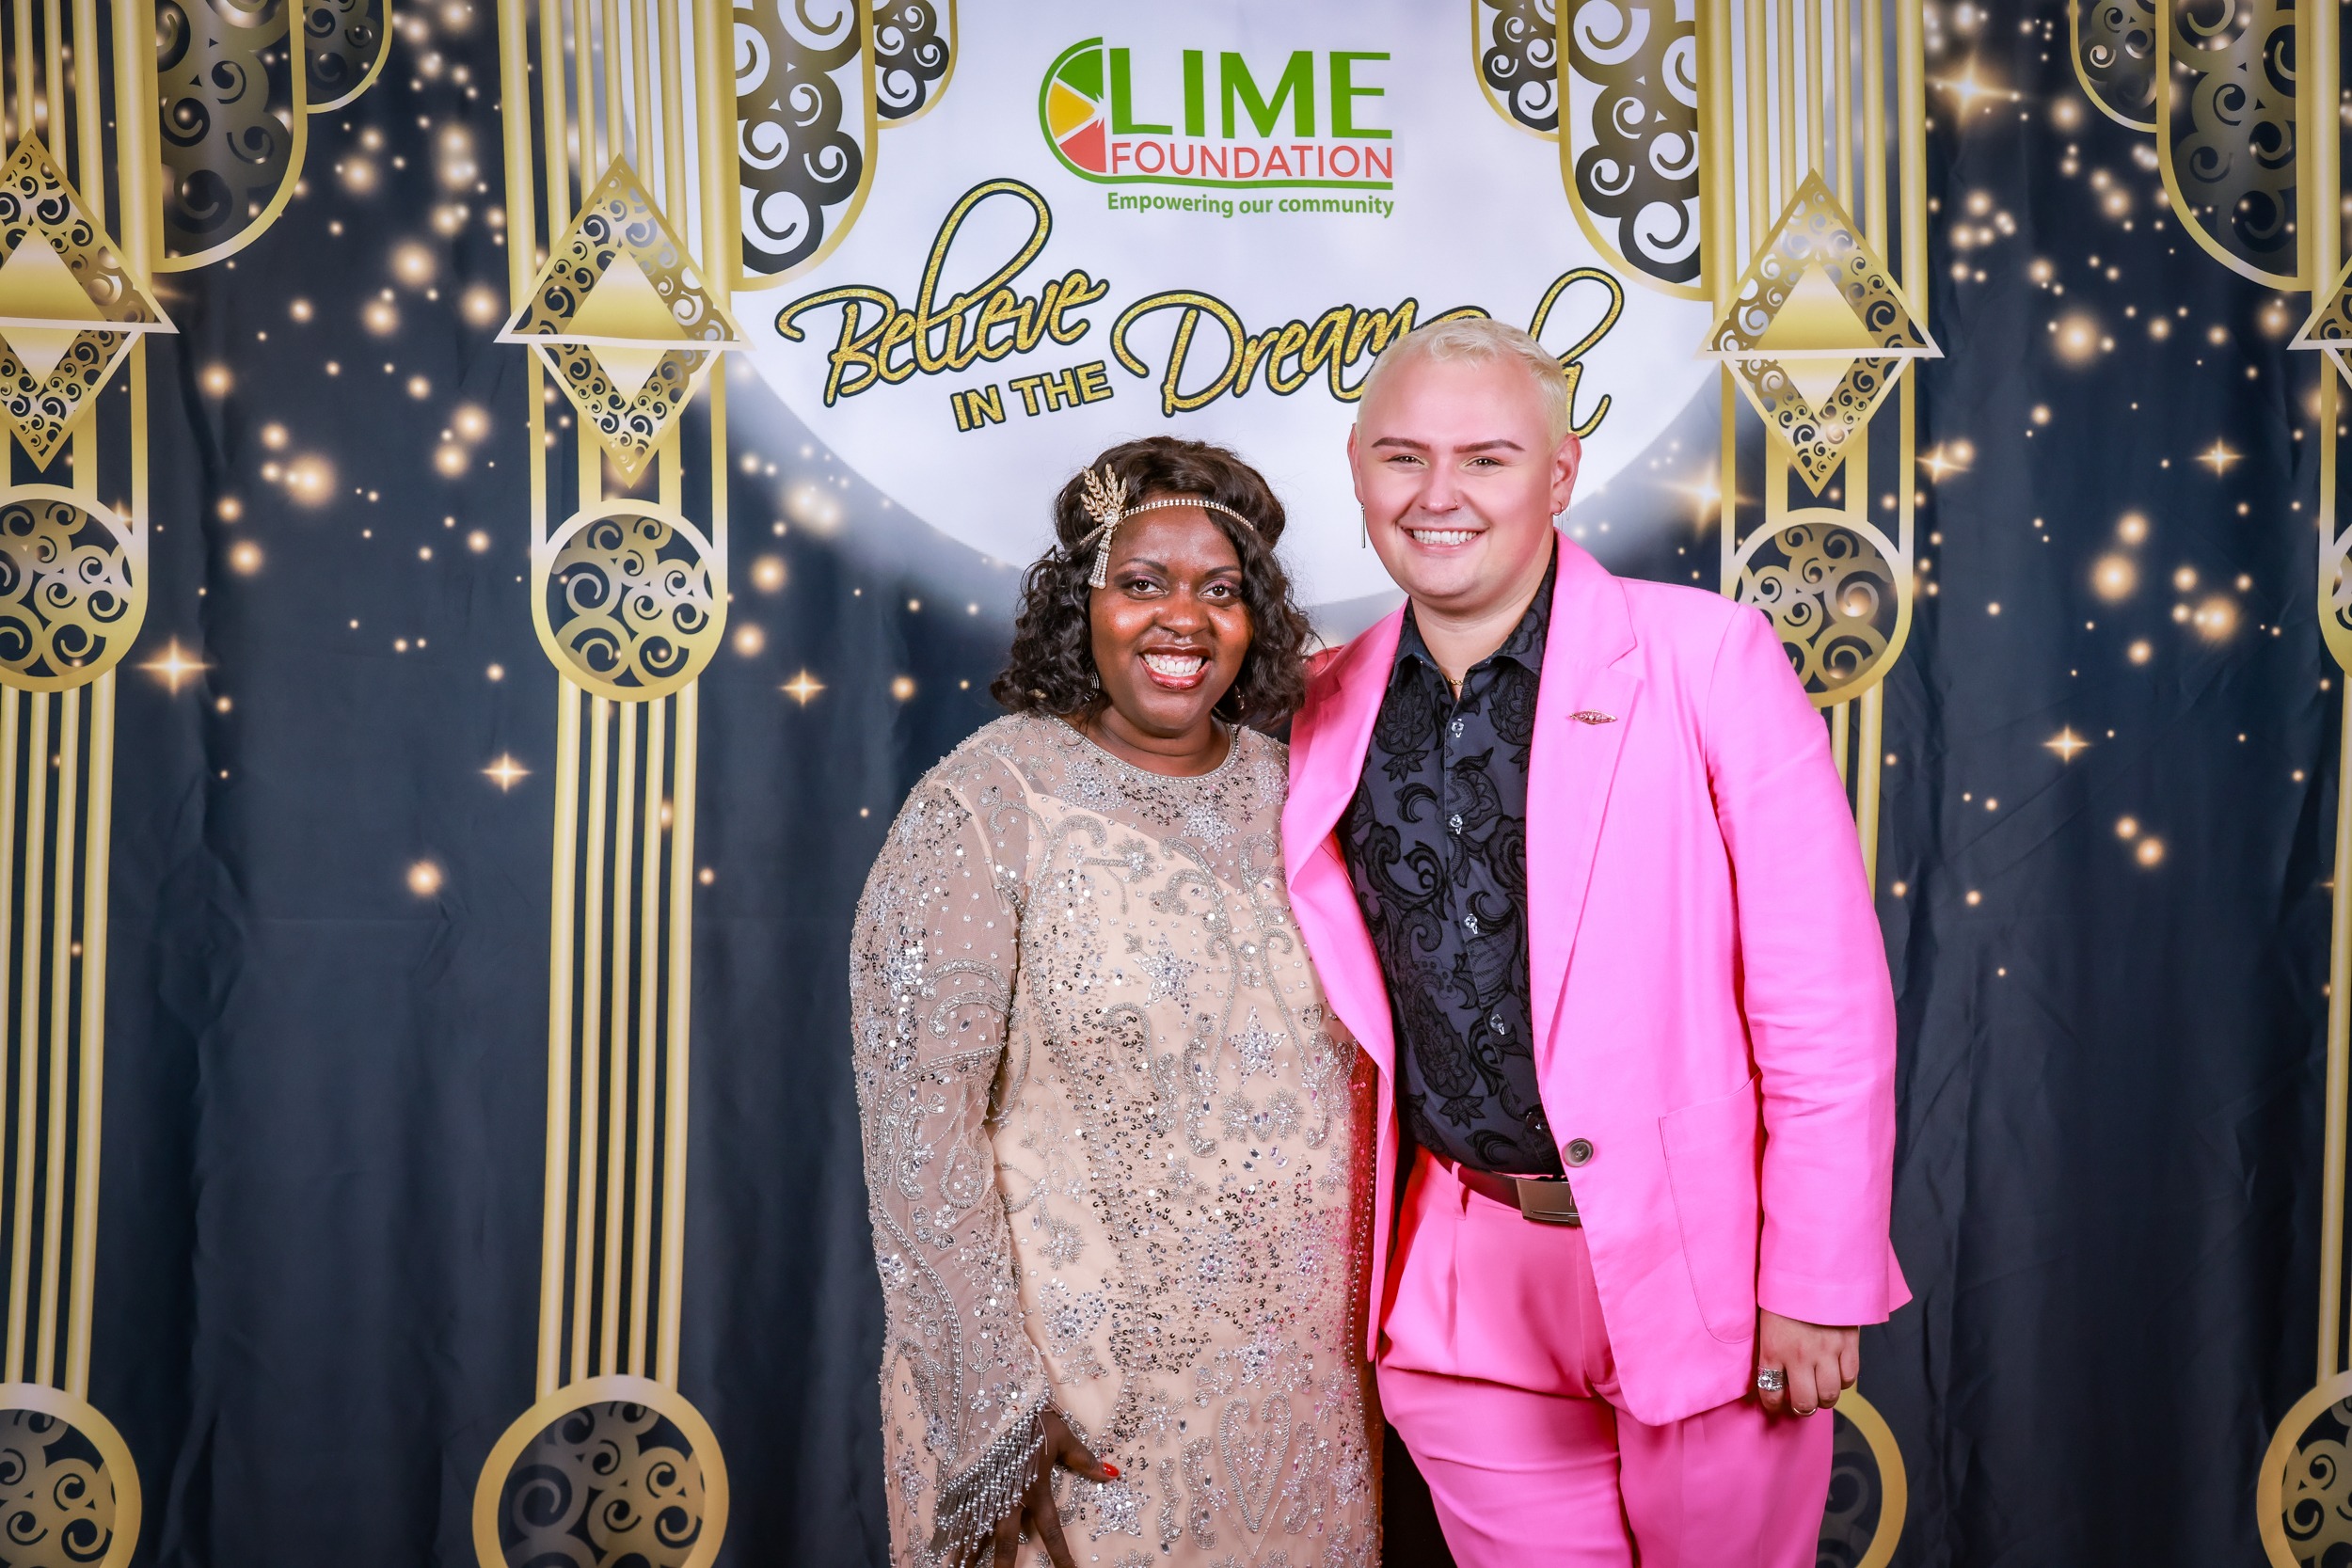 A man in a pink suit and a woman in a pink dress at an event held by Sonoma County Non-Profit Organization.